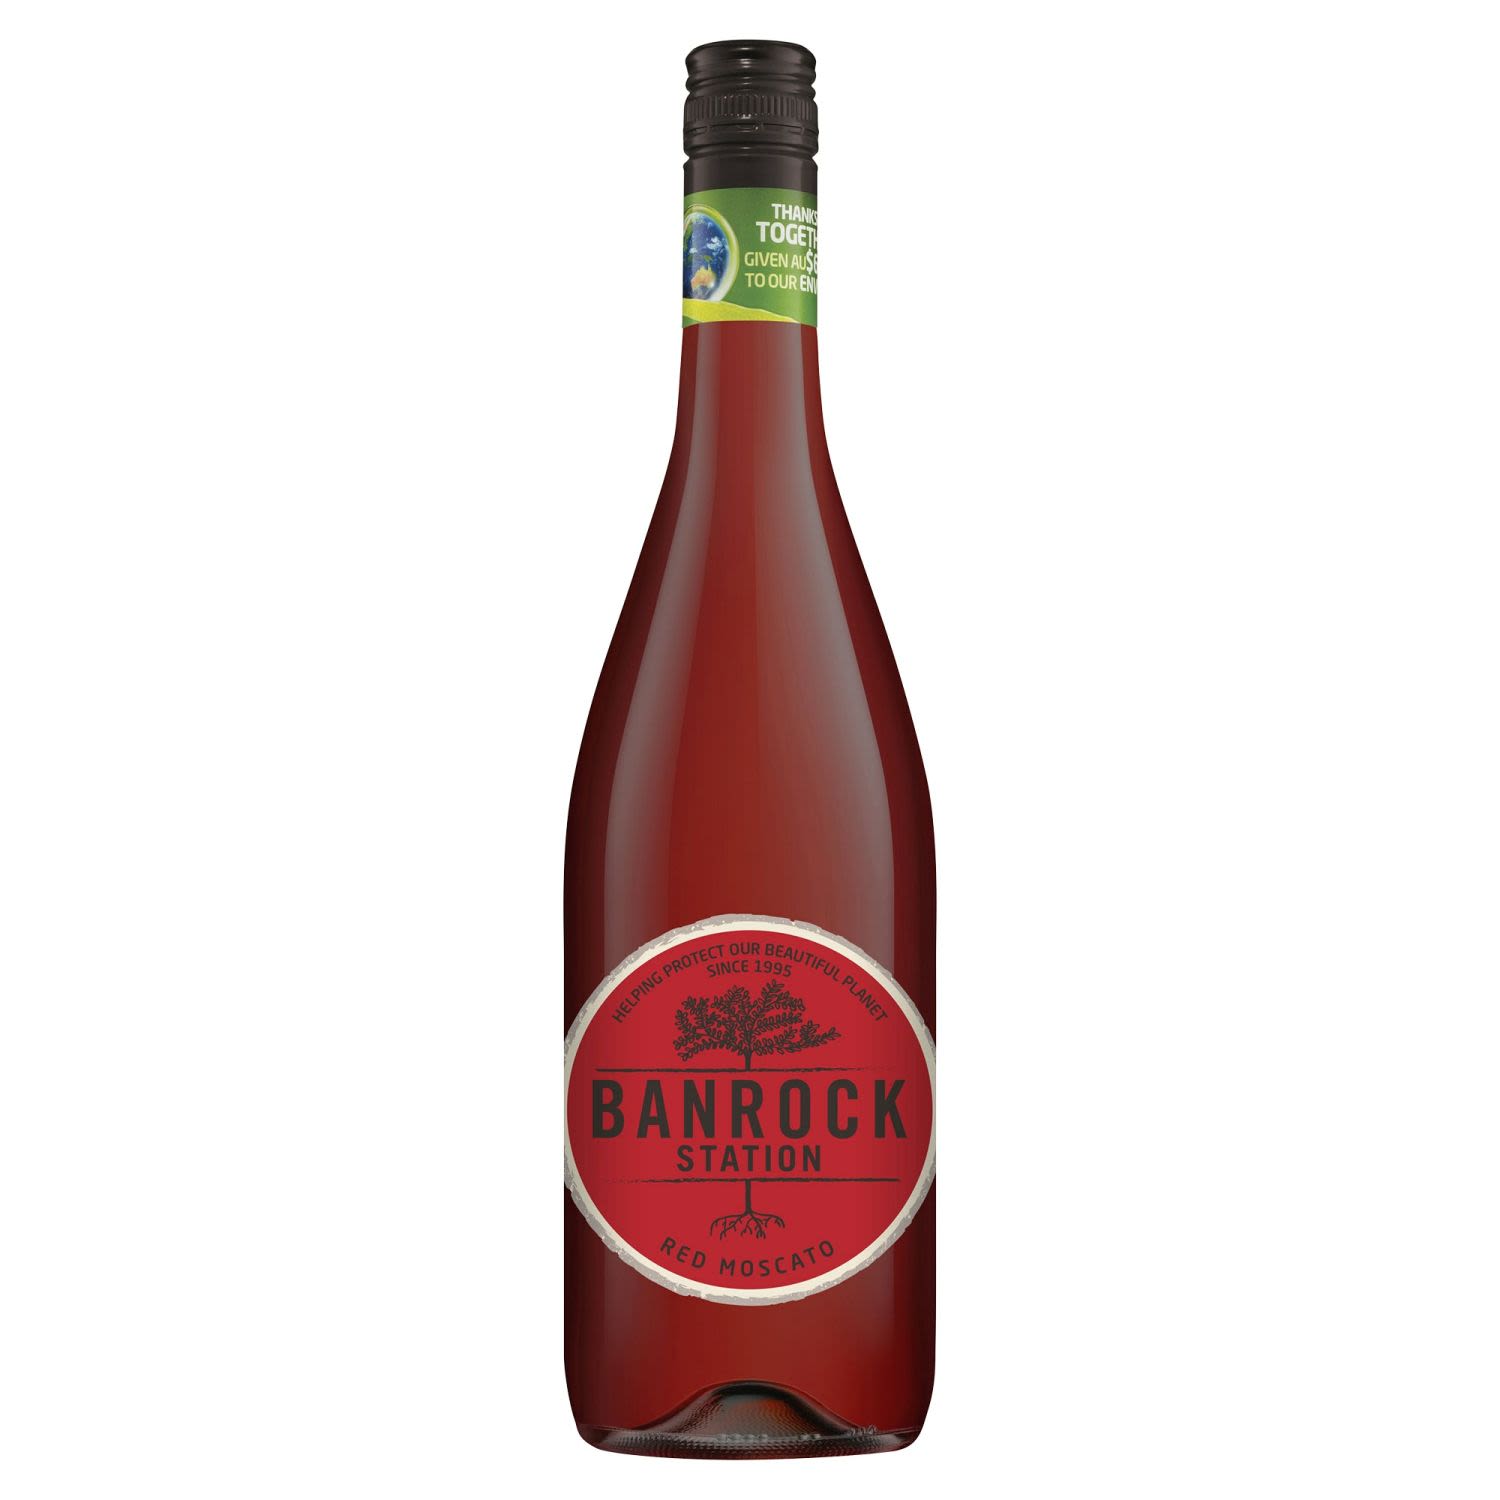 The Banrock Station White Shiraz displays fresh lifted strawberry, cherry and citrus aromas, with hints of spice. A rich creamy palate with concentrated berry flavours and soft tannins leave a lingering fresh acid finish.<br /> <br />Alcohol Volume: 12.00%<br /><br />Pack Format: Bottle<br /><br />Standard Drinks: 9.5</br /><br />Pack Type: Bottle<br /><br />Country of Origin: Australia<br /><br />Region: Riverina<br /><br />Vintage: Vintages Vary<br />